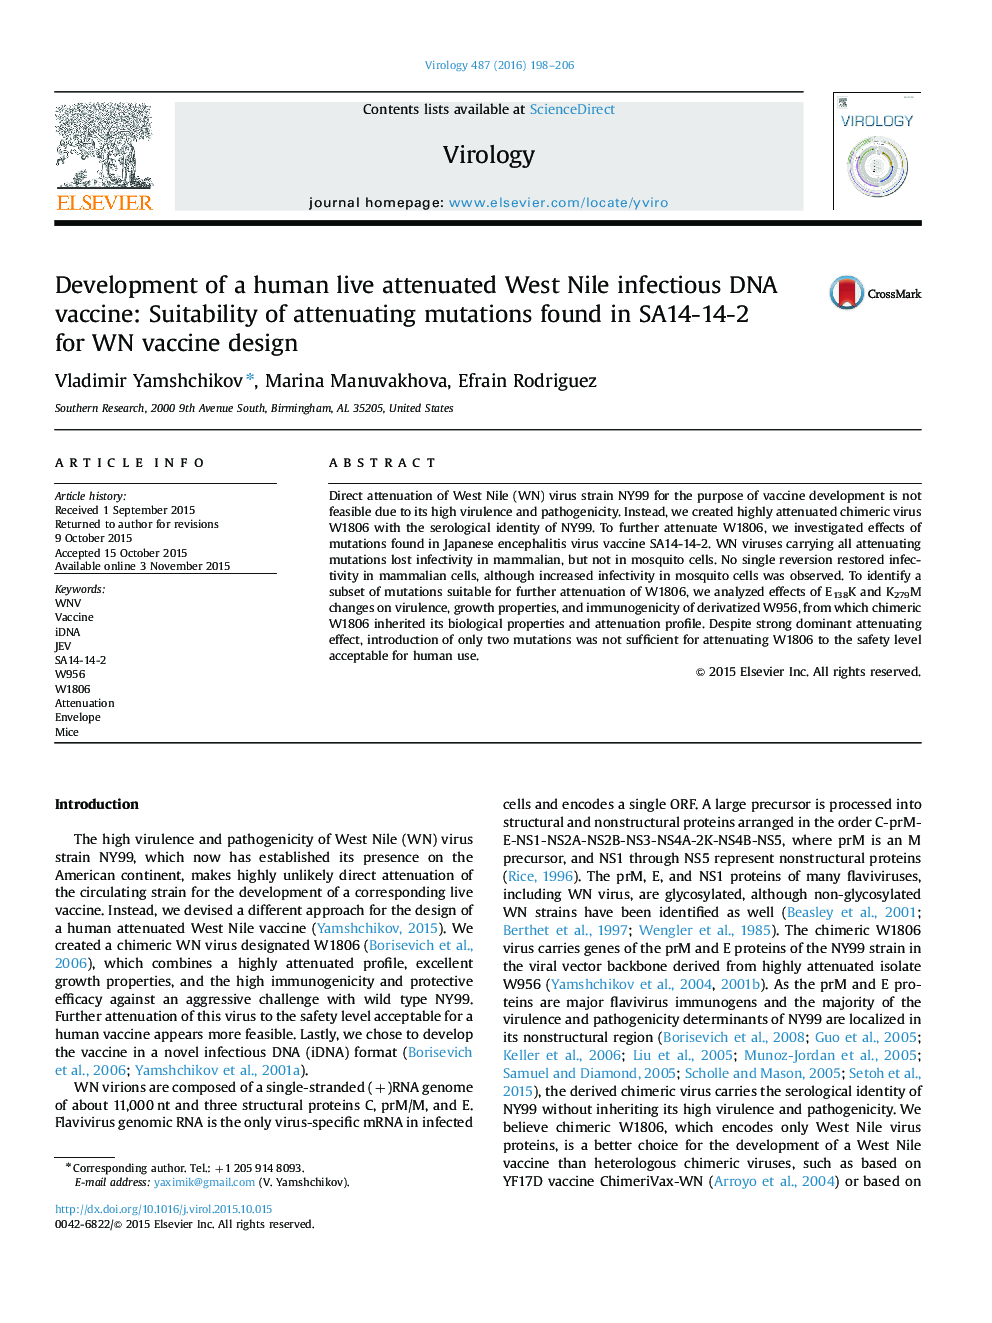 Development of a human live attenuated West Nile infectious DNA vaccine: Suitability of attenuating mutations found in SA14-14-2 for WN vaccine design